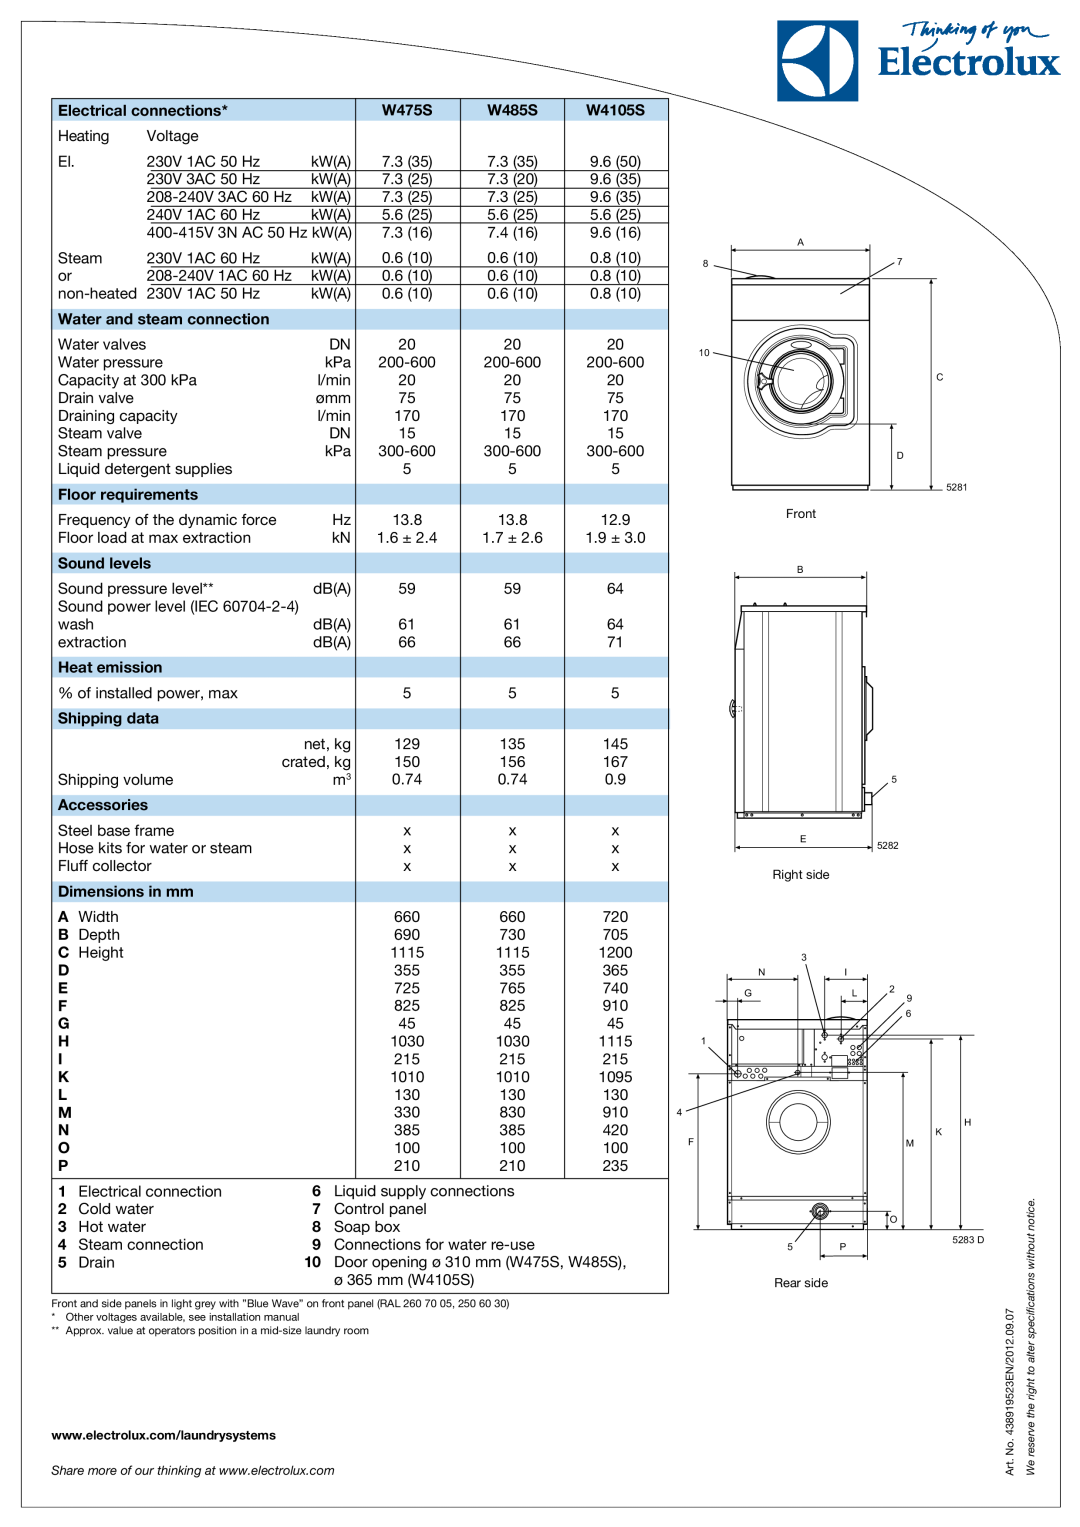 Electrolux W475S, W485S, W4105S specifications Electrical connections 